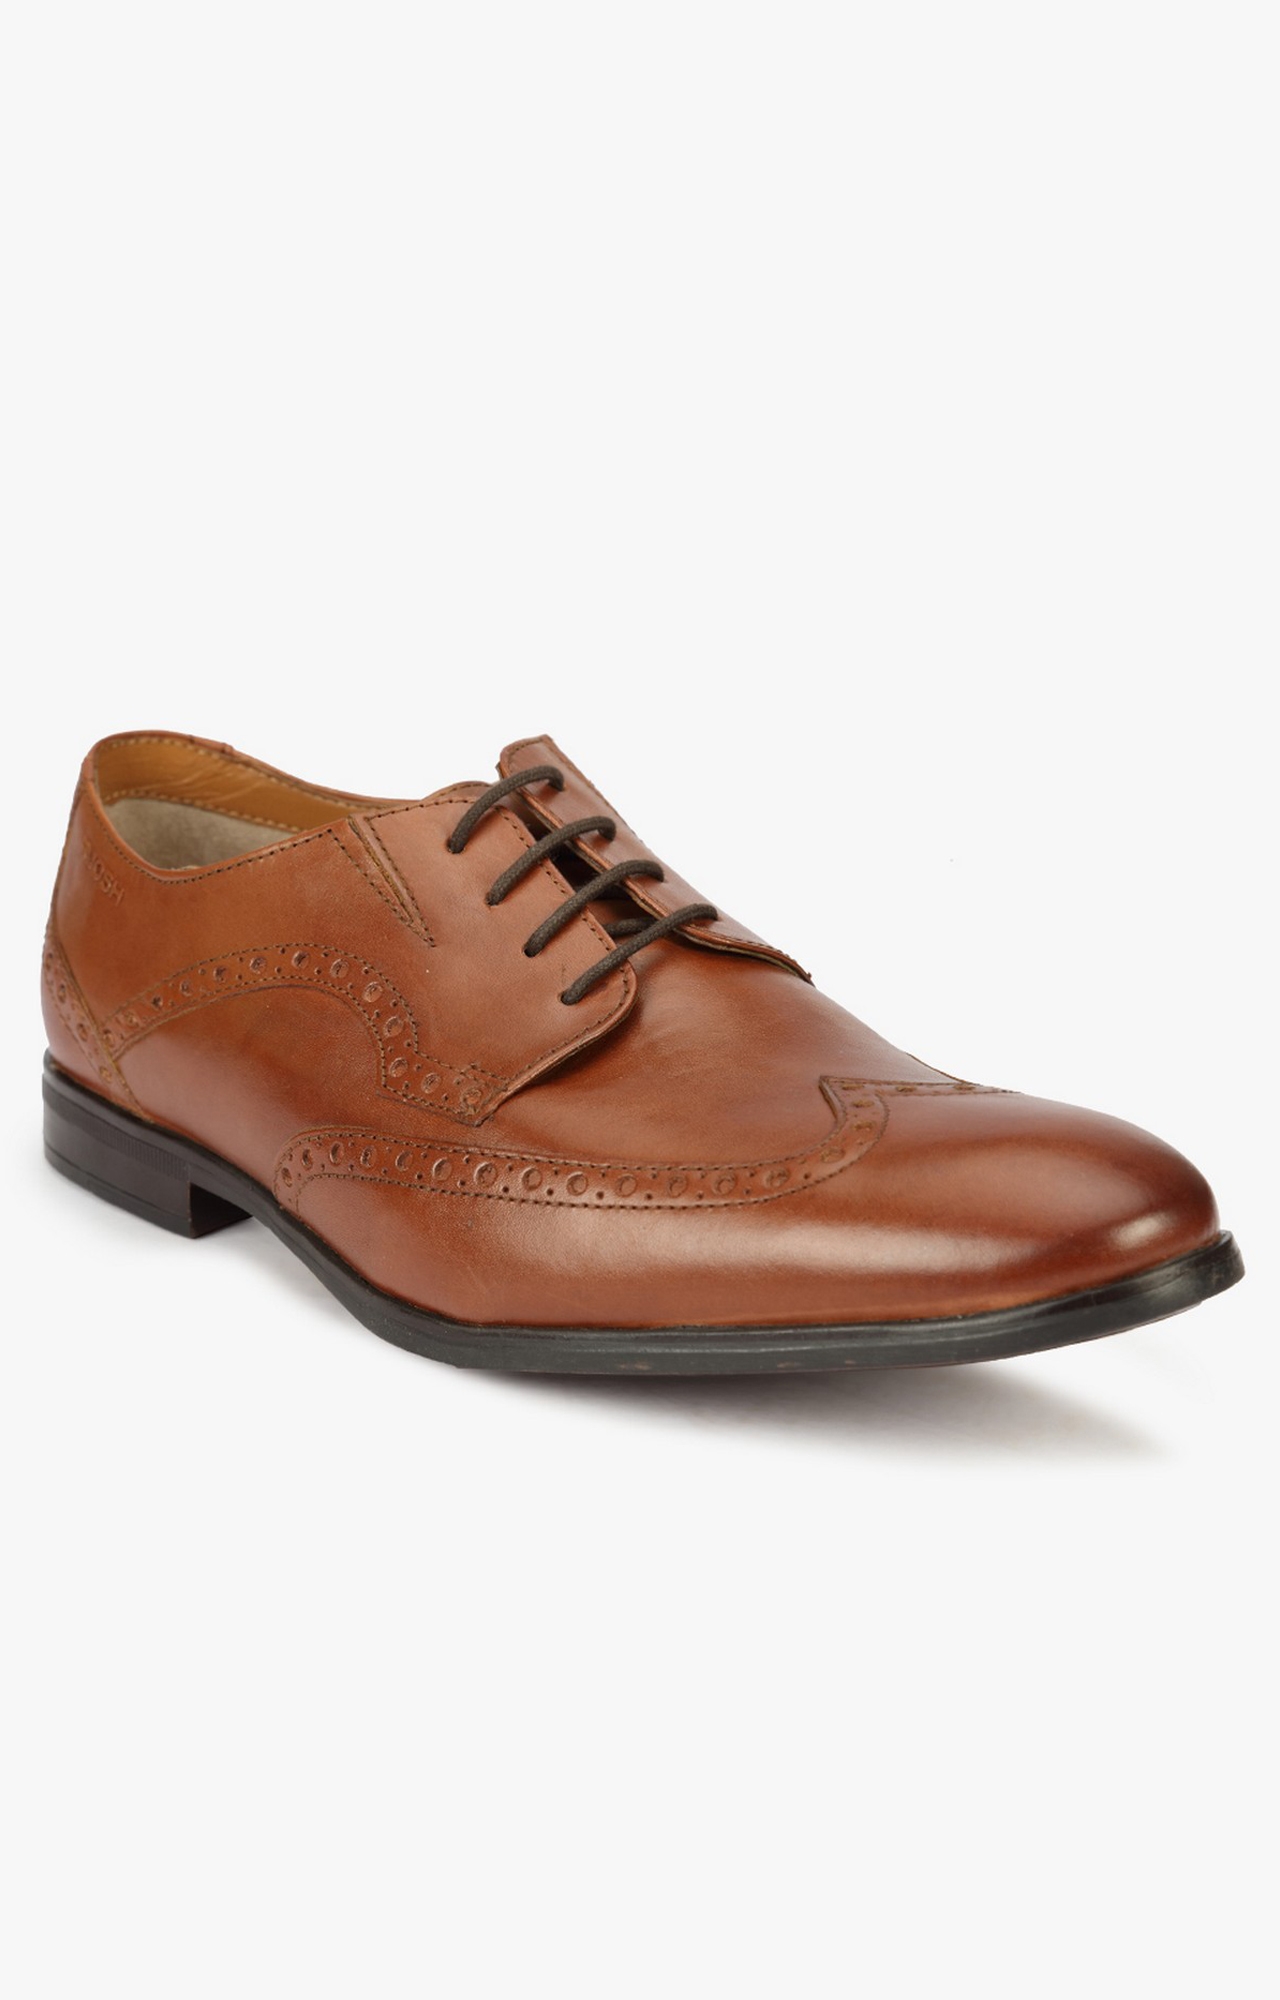 Ruosh | Tan Derby Shoes 0